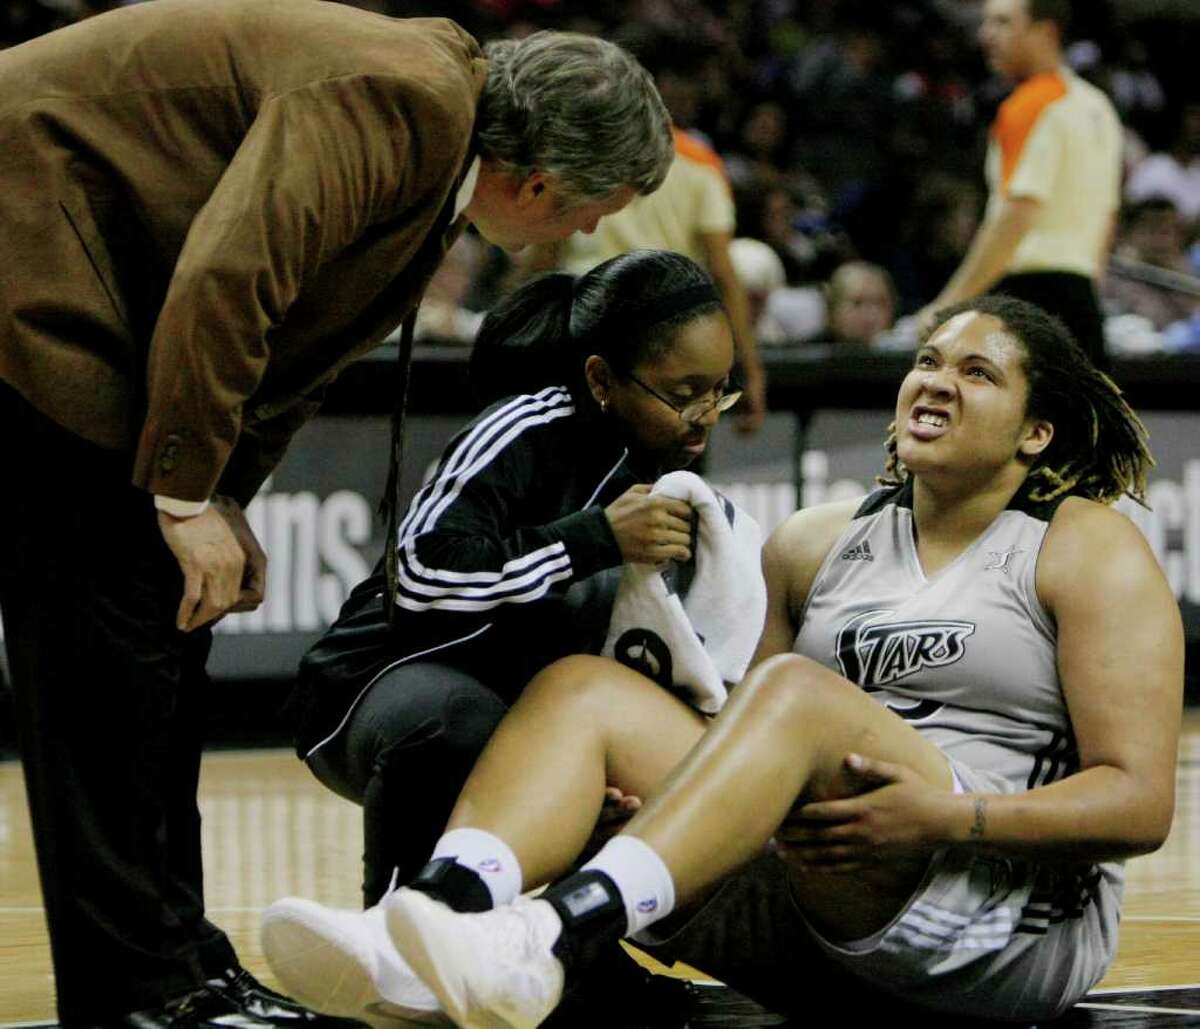 Silver Stars head coach Dan Hughes, left, looks on as Stars' Danielle Adams, right, is checked out after suffering an injury during the first half of a WNBA basketball game against the Washington Mystics, Saturday, Sept. 10, 2011, in San Antonio.